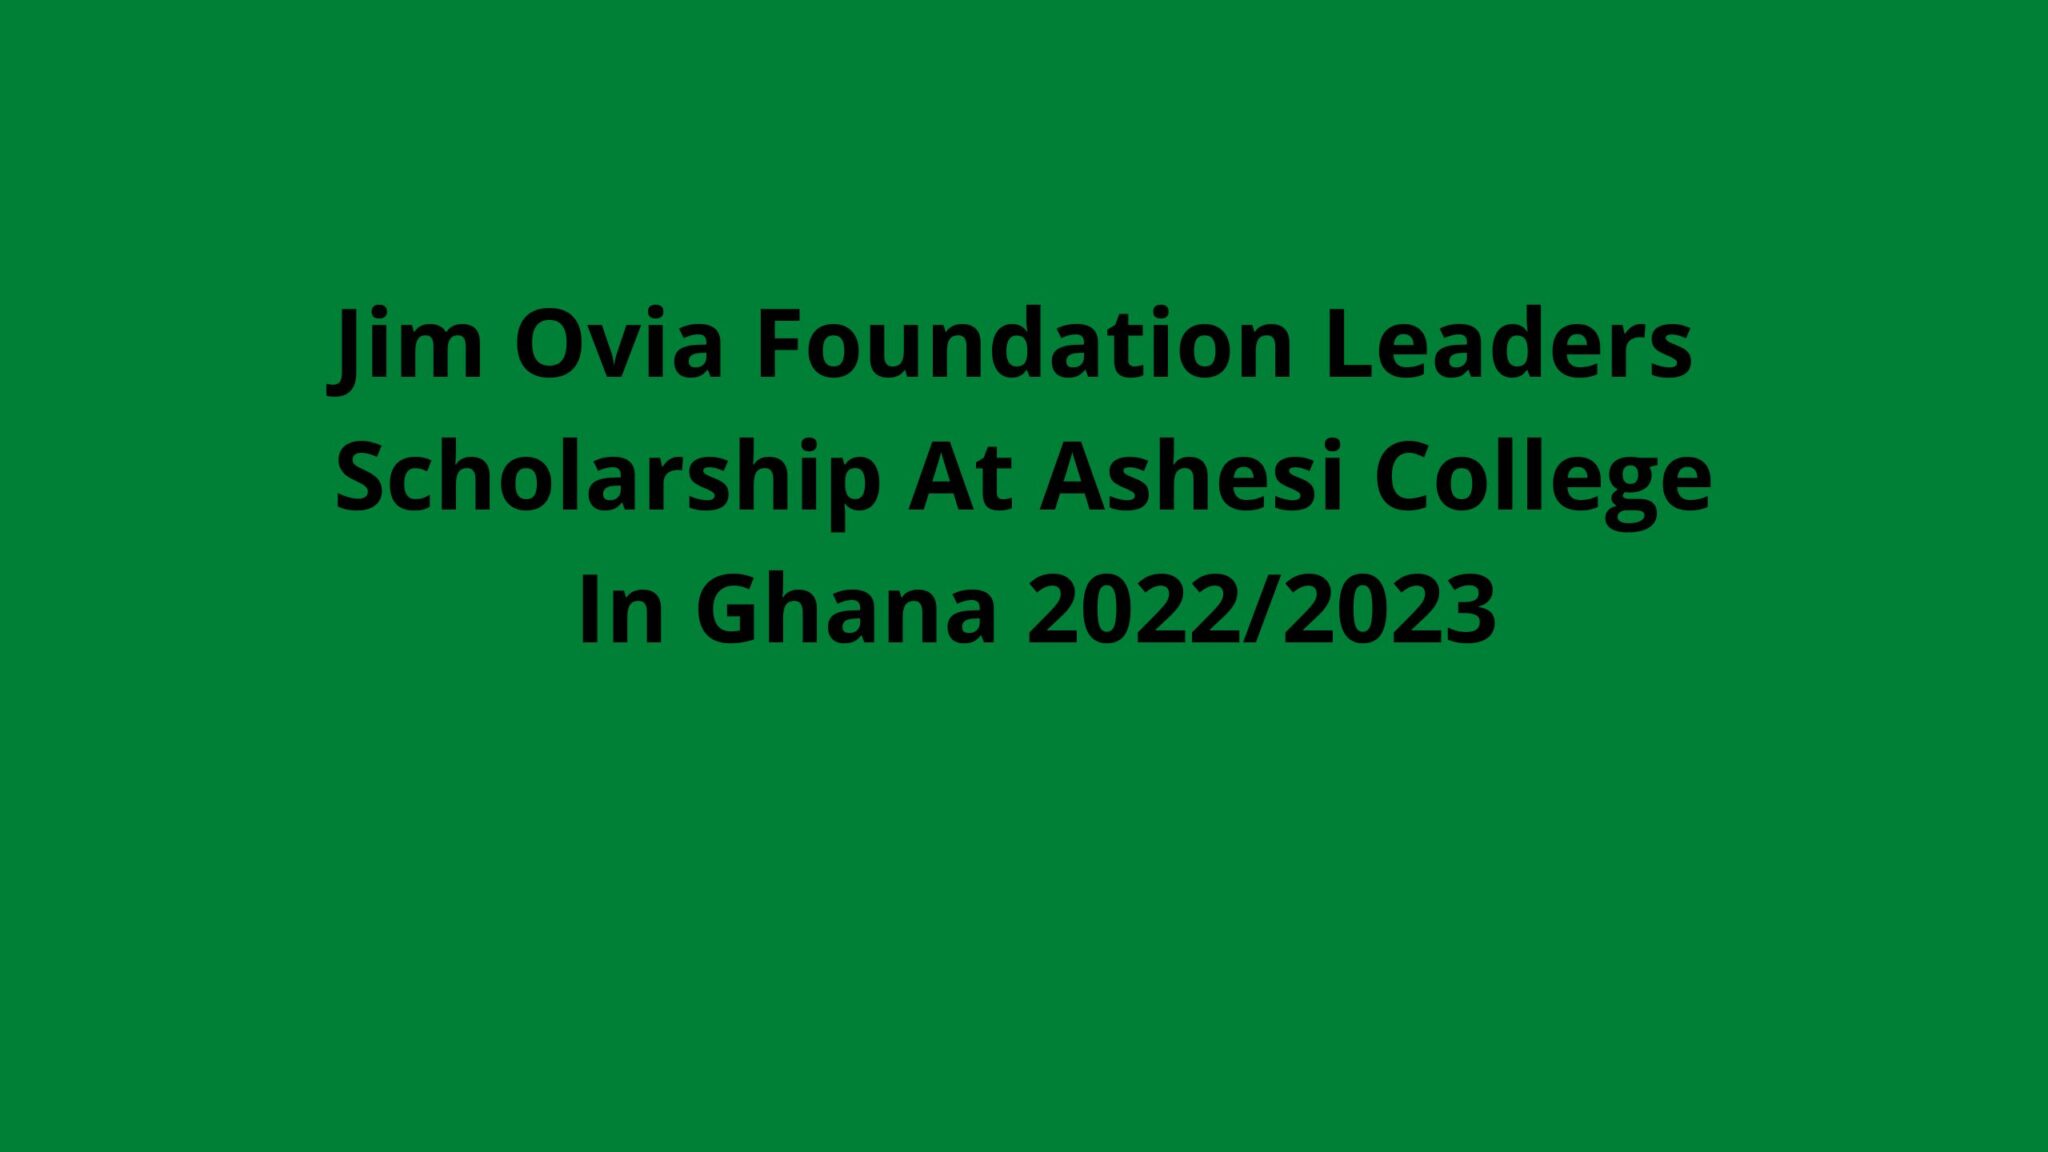 Jim Ovia Foundation Leaders Scholarship At Ashesi College In Ghana 2022/2023